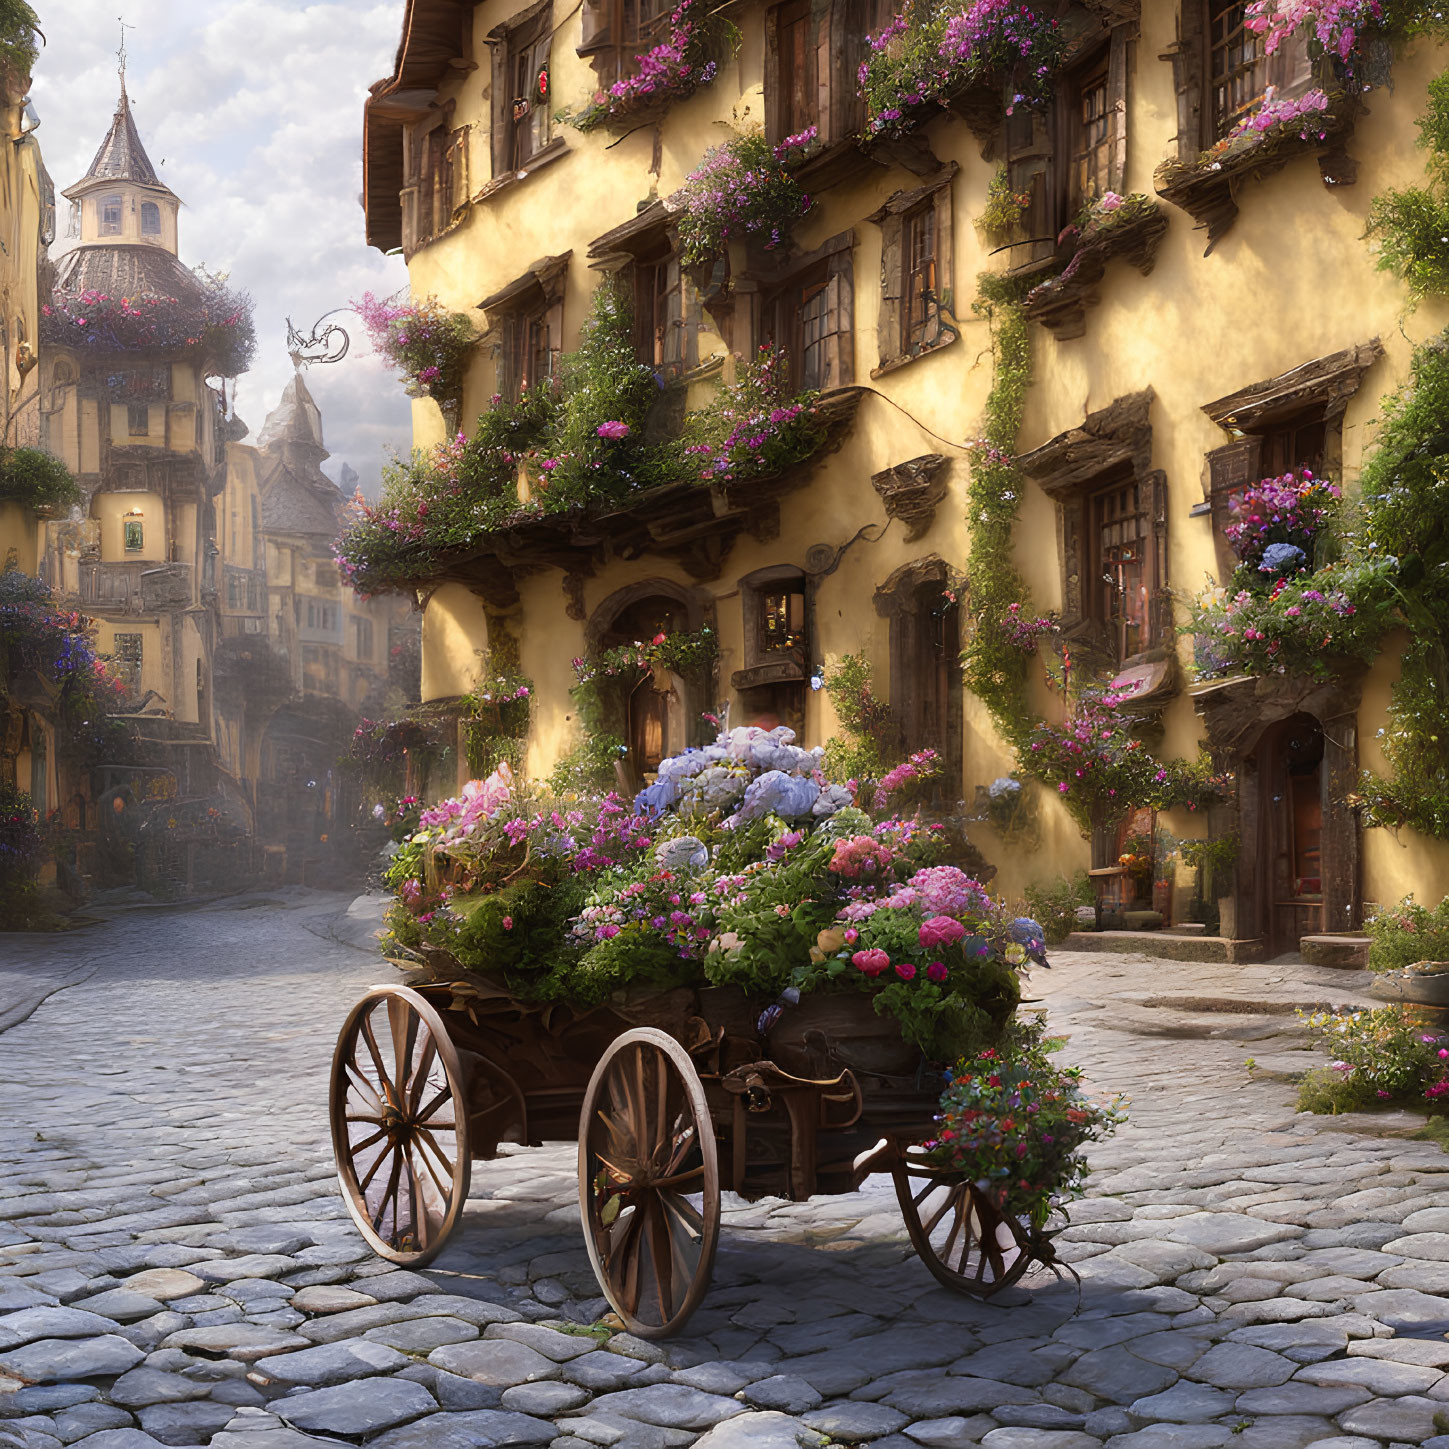 Scenic cobblestone street with flower cart and blooming buildings